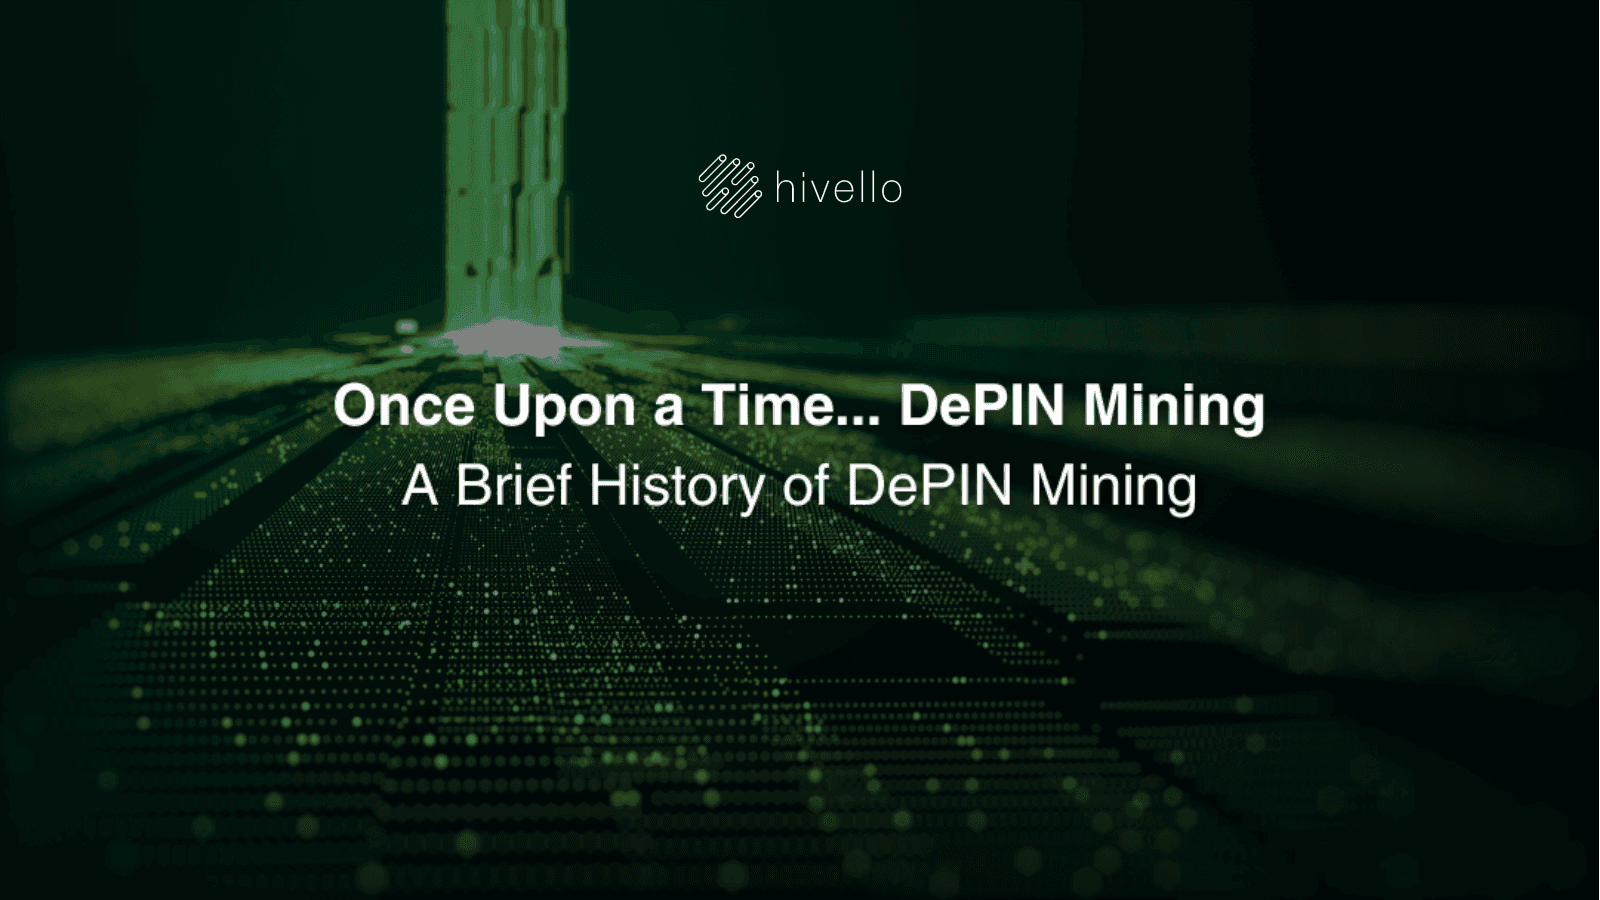 Hivello_Once Upon a Time... DePIN Mining.png